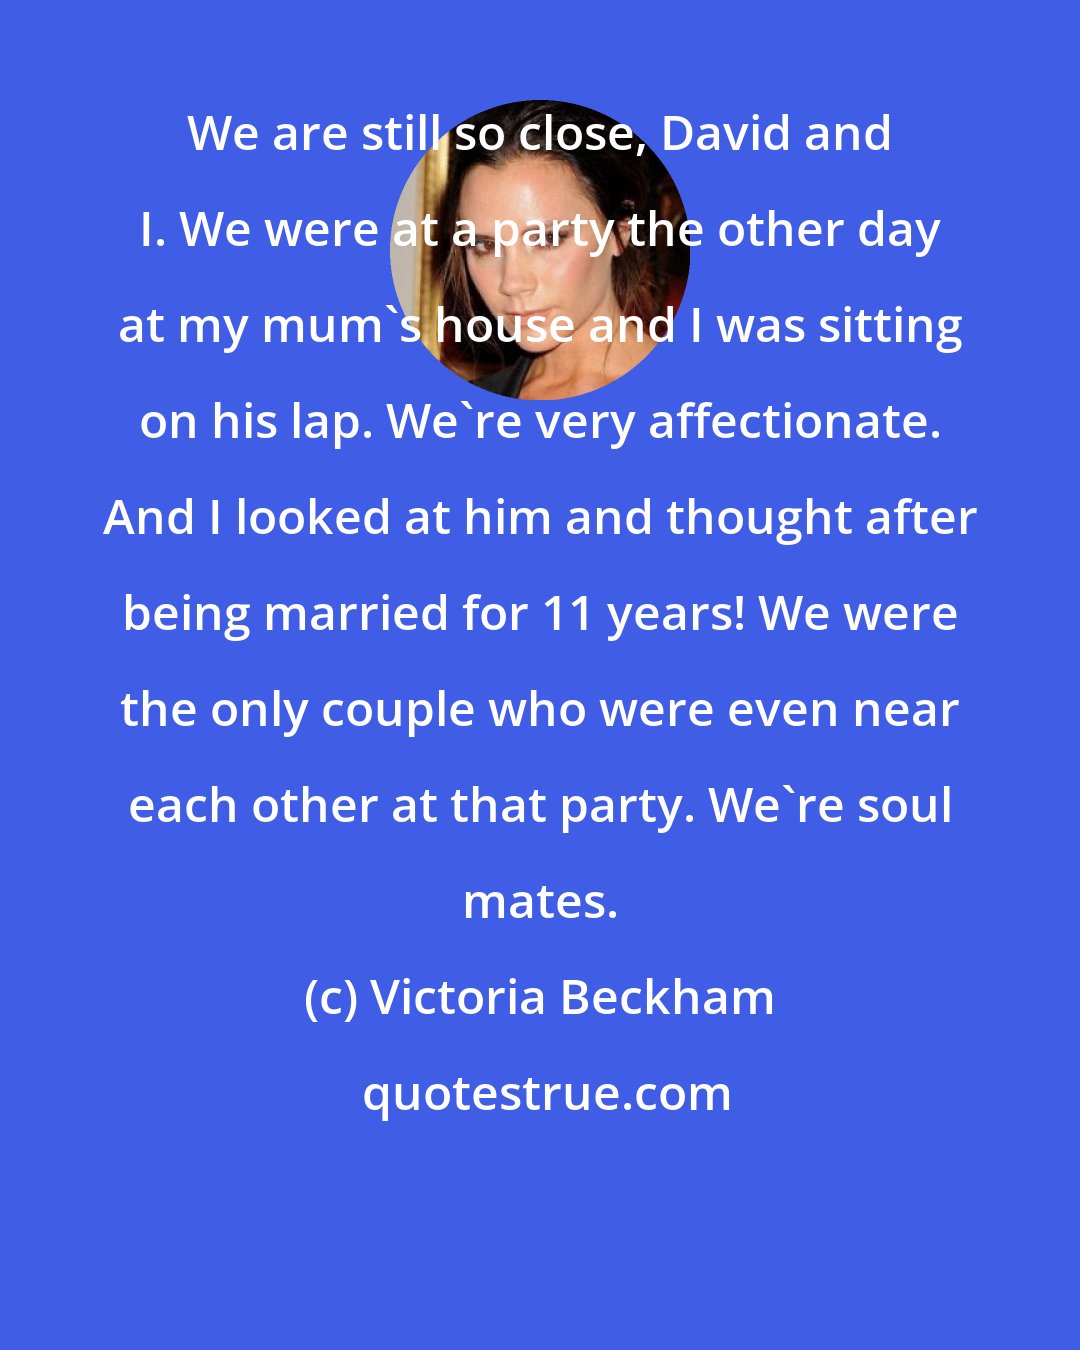 Victoria Beckham: We are still so close, David and I. We were at a party the other day at my mum's house and I was sitting on his lap. We're very affectionate. And I looked at him and thought after being married for 11 years! We were the only couple who were even near each other at that party. We're soul mates.